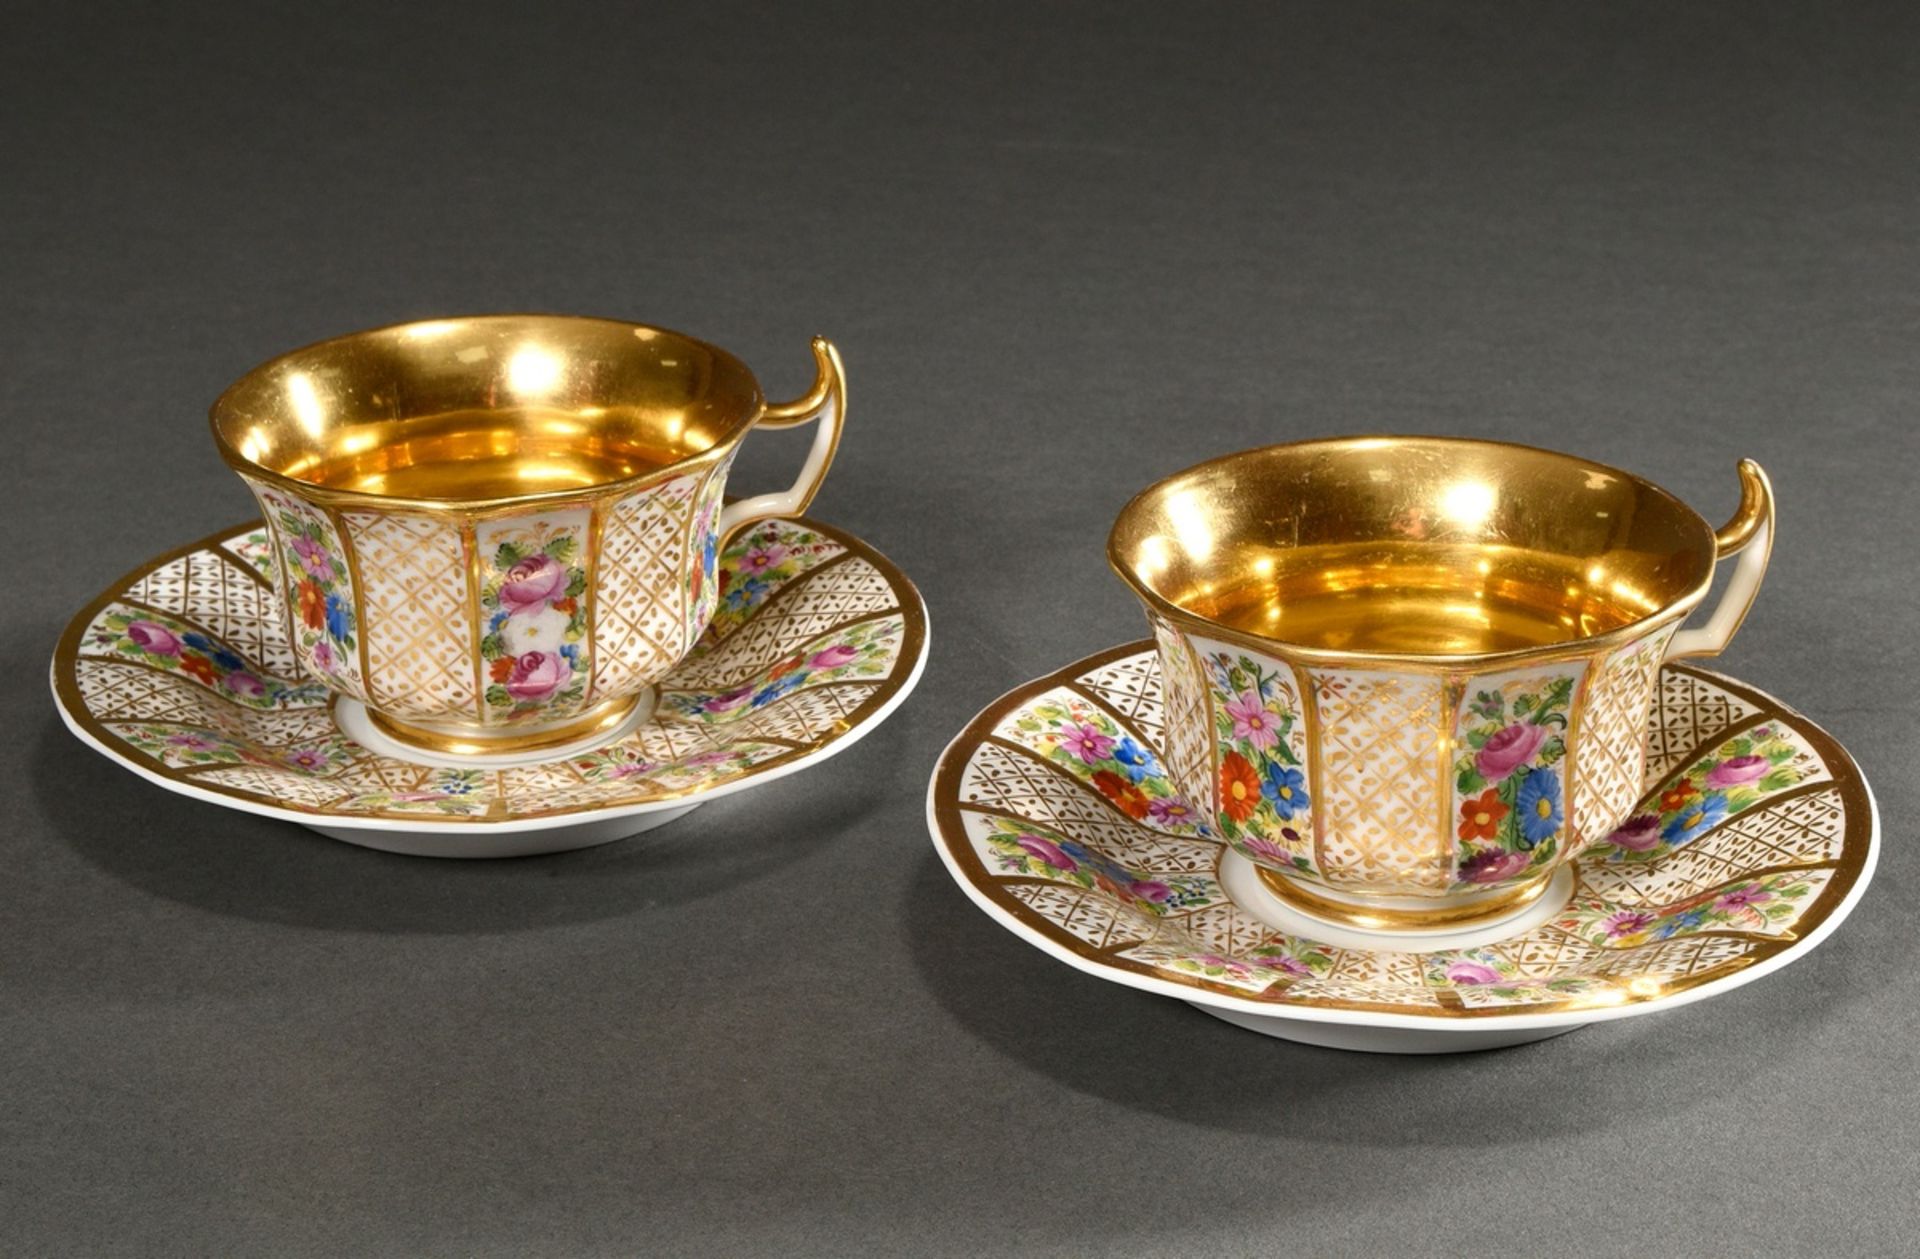 Pair of Biedermeier coffee cups/saucers with rich floral and gold decoration, Krister Porzellan Man - Image 3 of 6